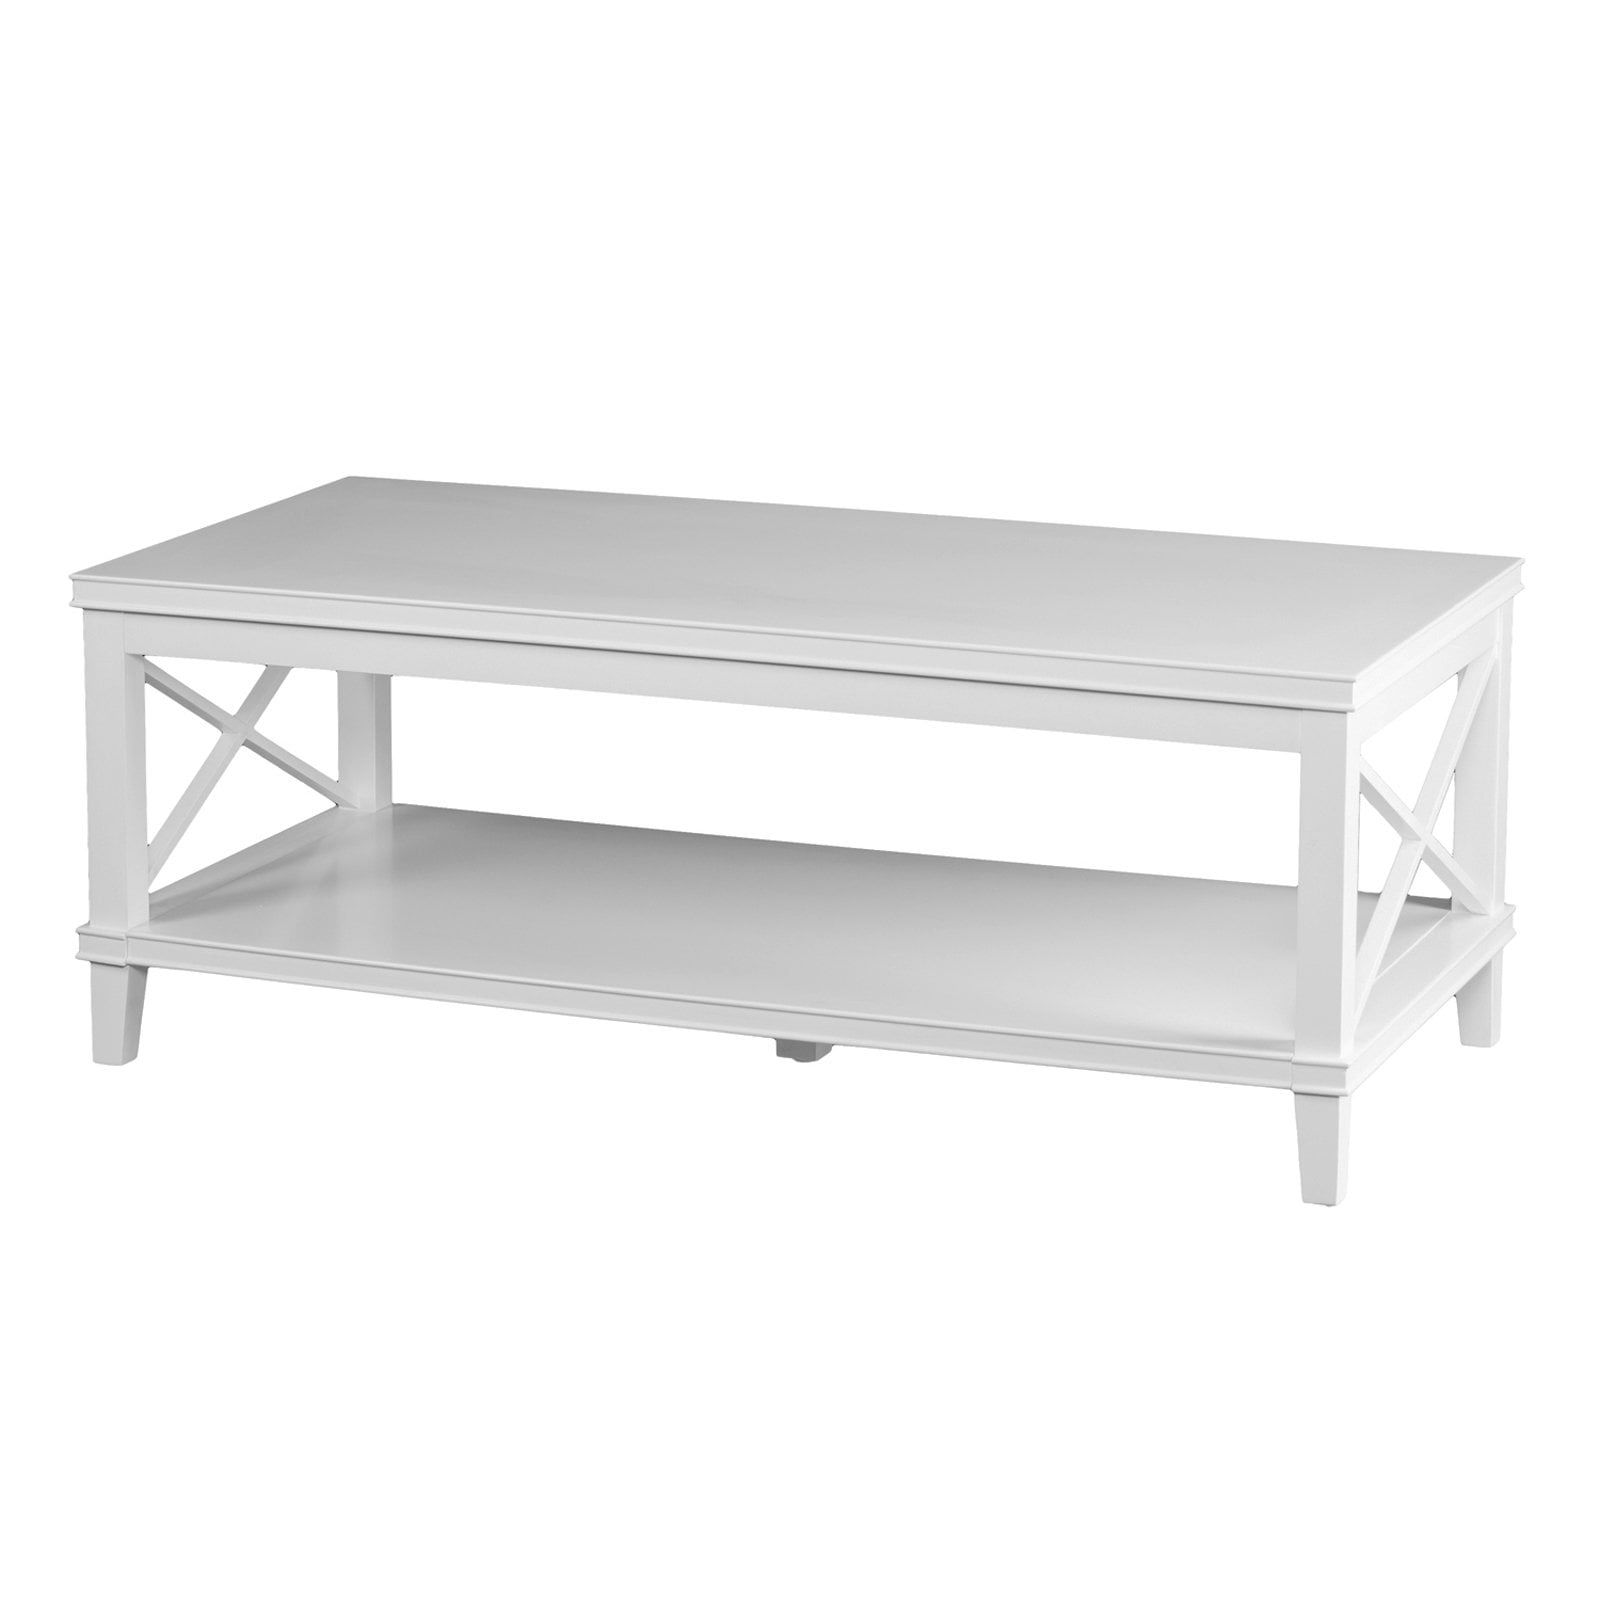 Southern Enterprises Larksmill Coffee Tables Inside Most Popular Southern Enterprises Larksmill Coffee Table – Walmart (View 3 of 10)